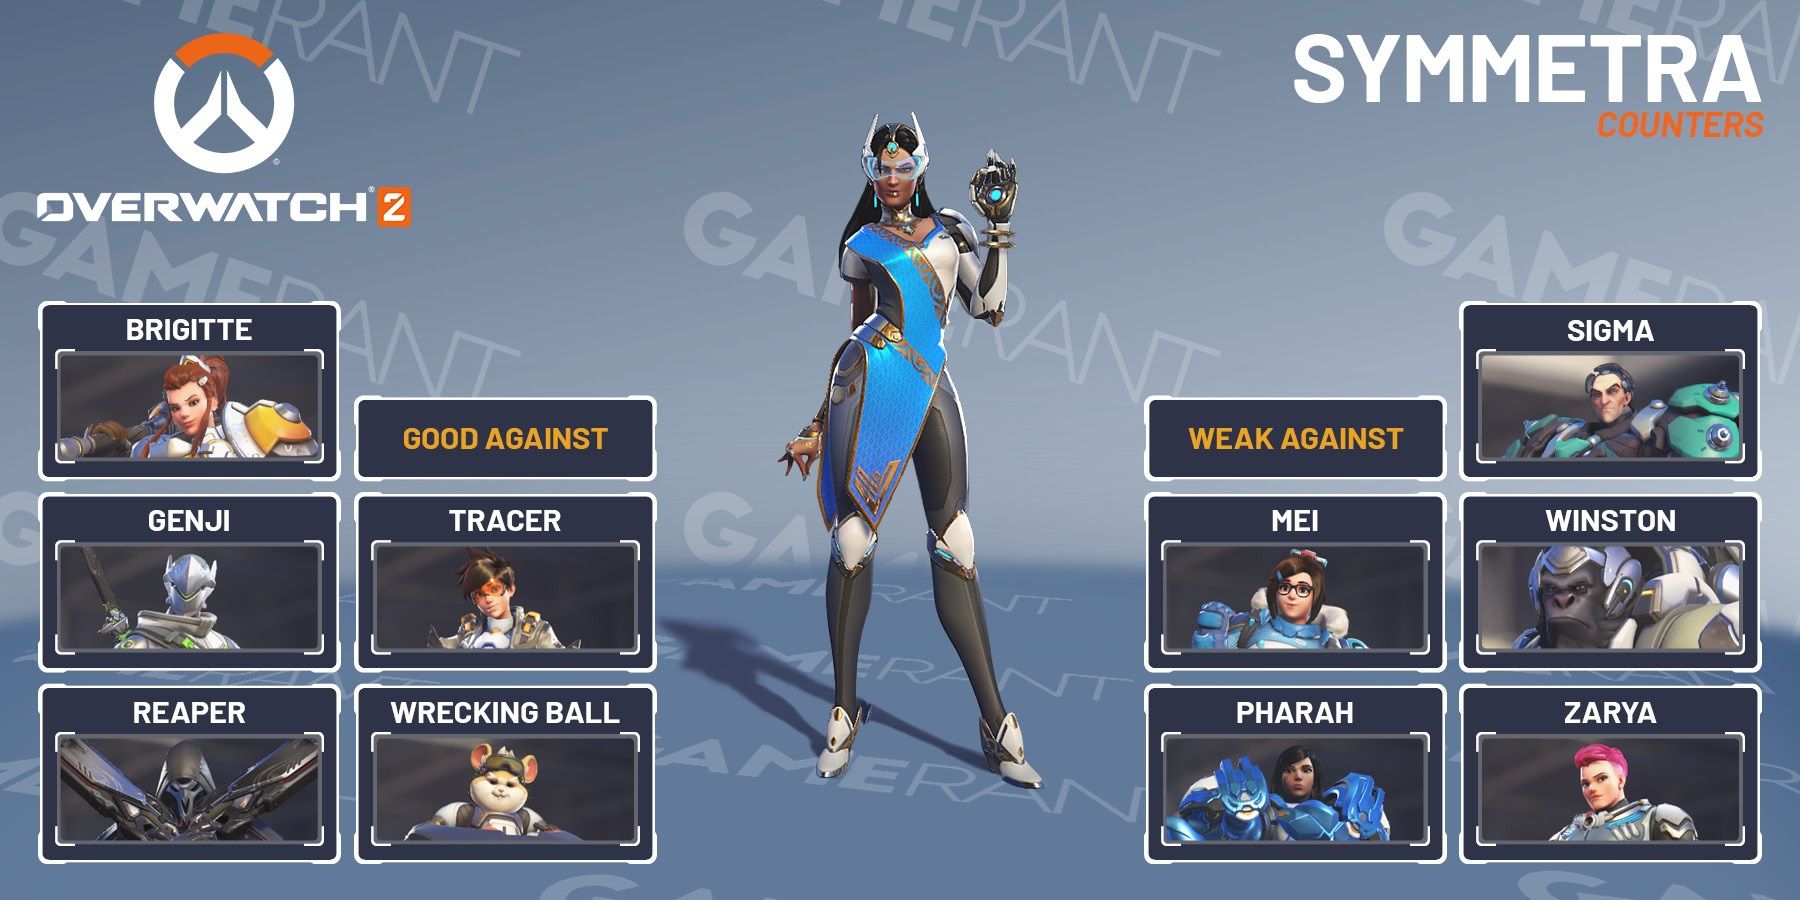 Overwatch 2 Symmetra Strength And Weakness